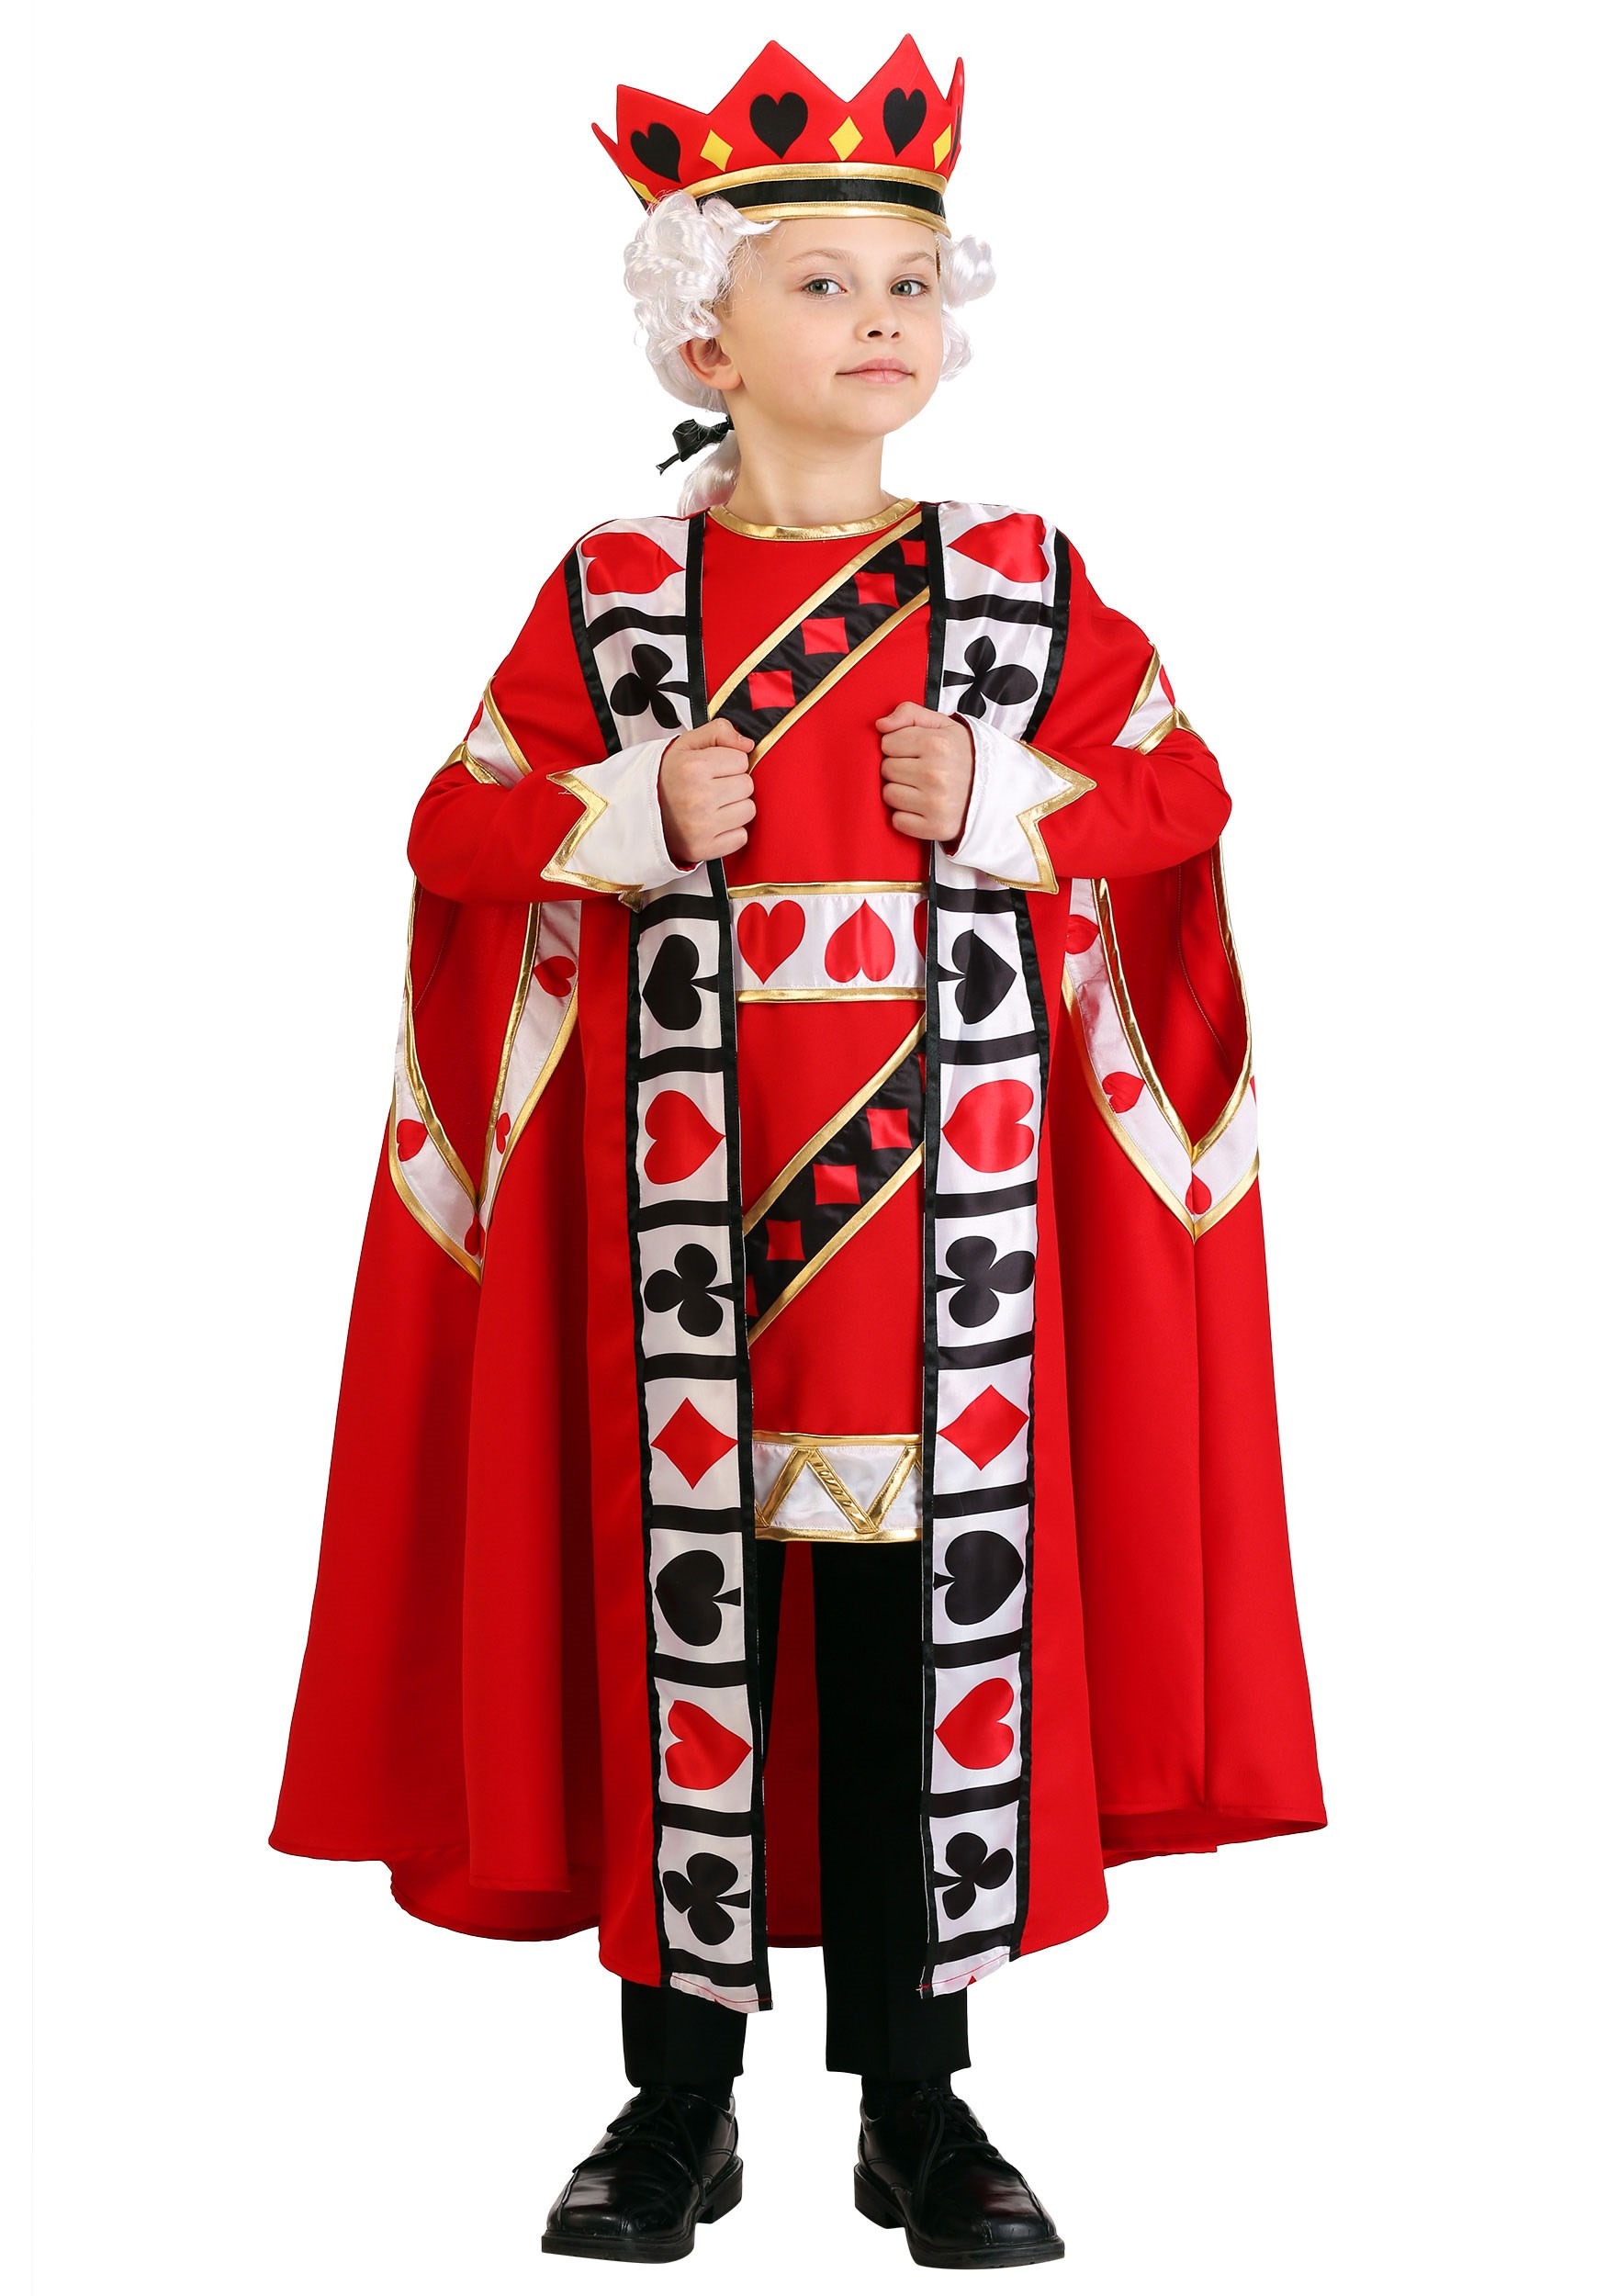 King of Hearts Costume for Kids